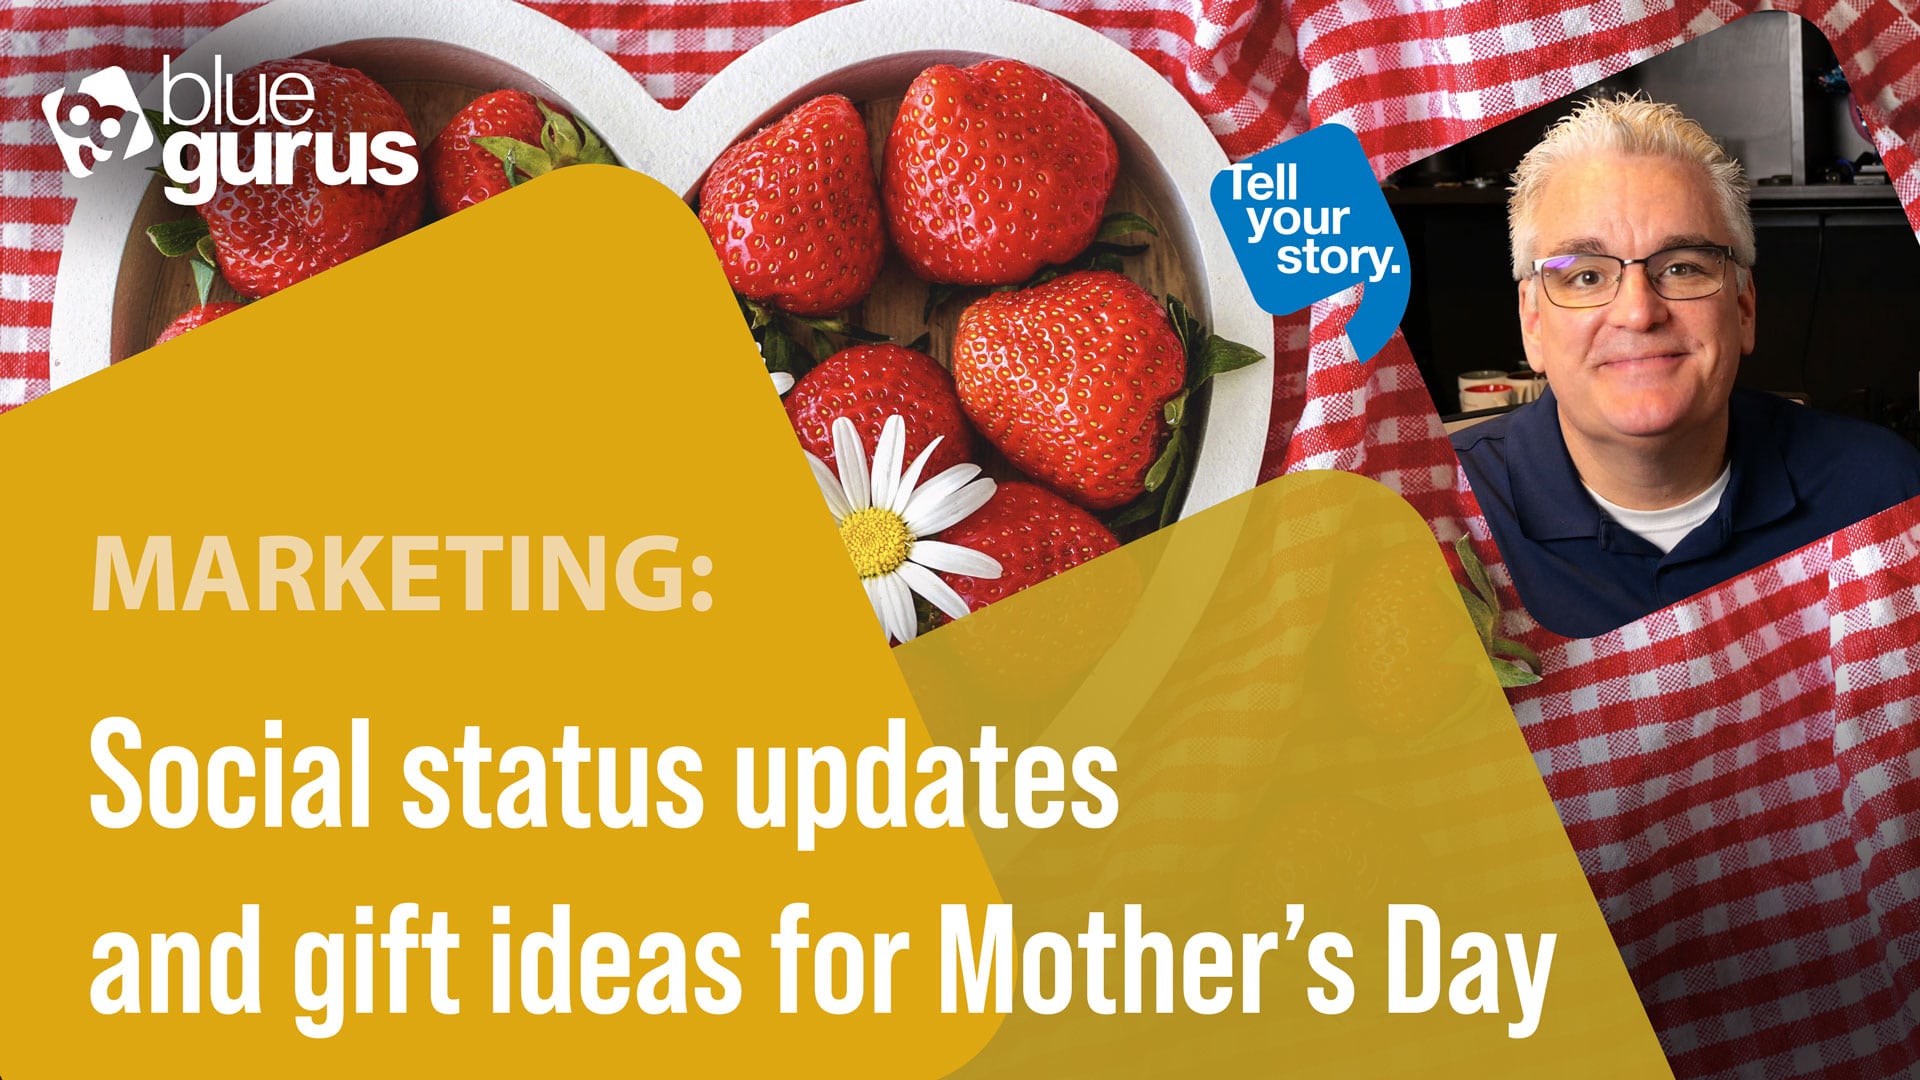 Social status updates and gift ideas for Mother’s Day